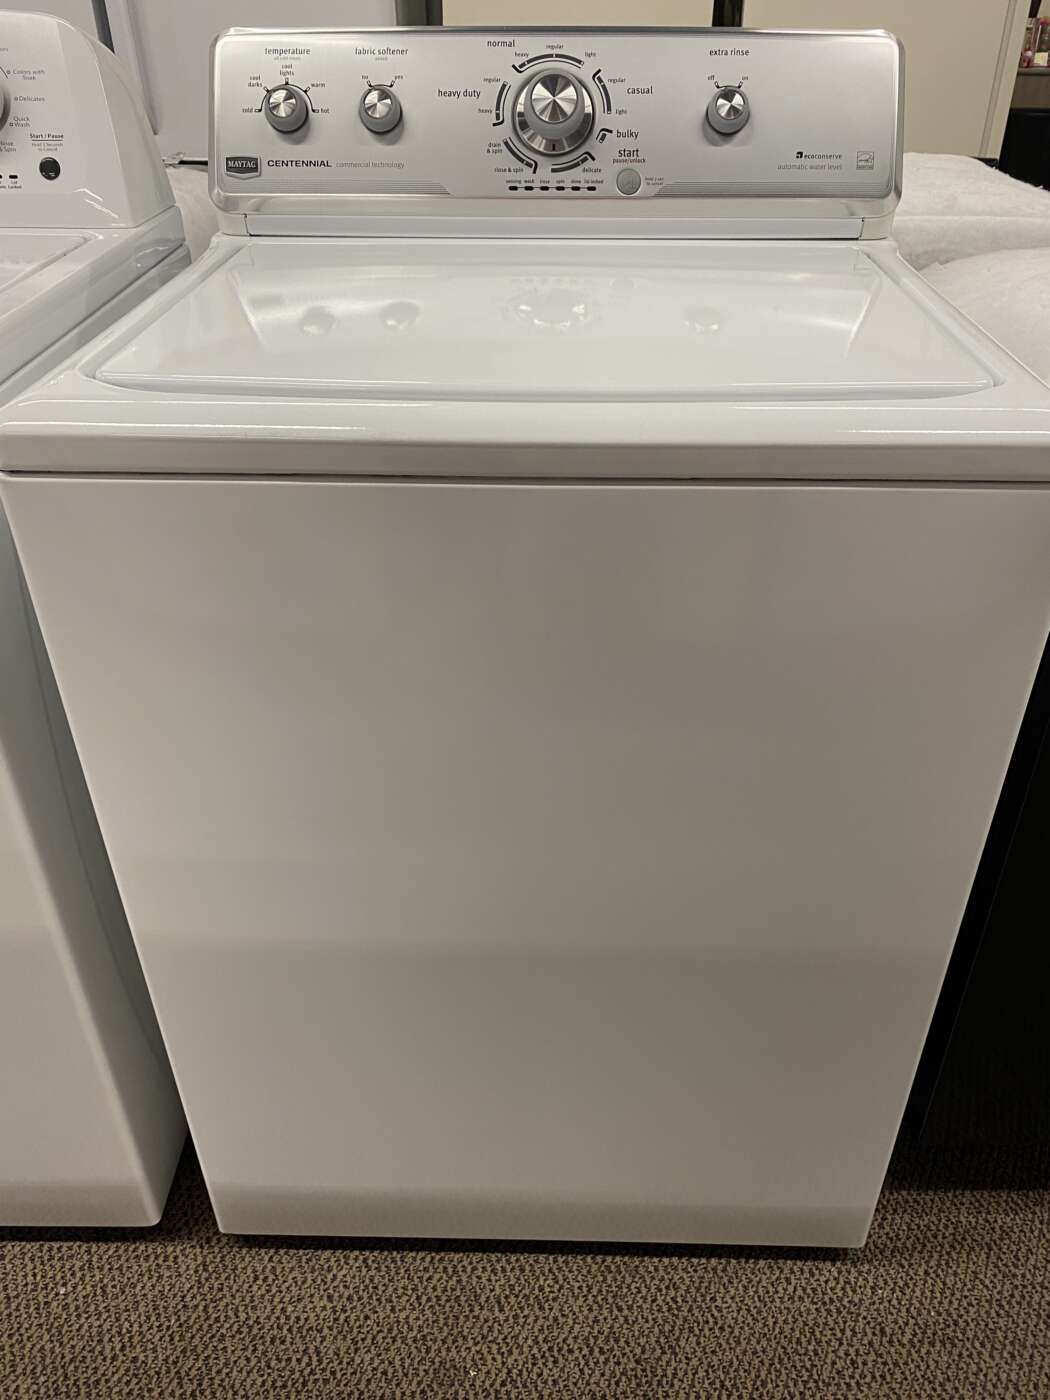 Reconditioned MAYTAG 3.4 Cu. Ft. Top-Load Washer – White